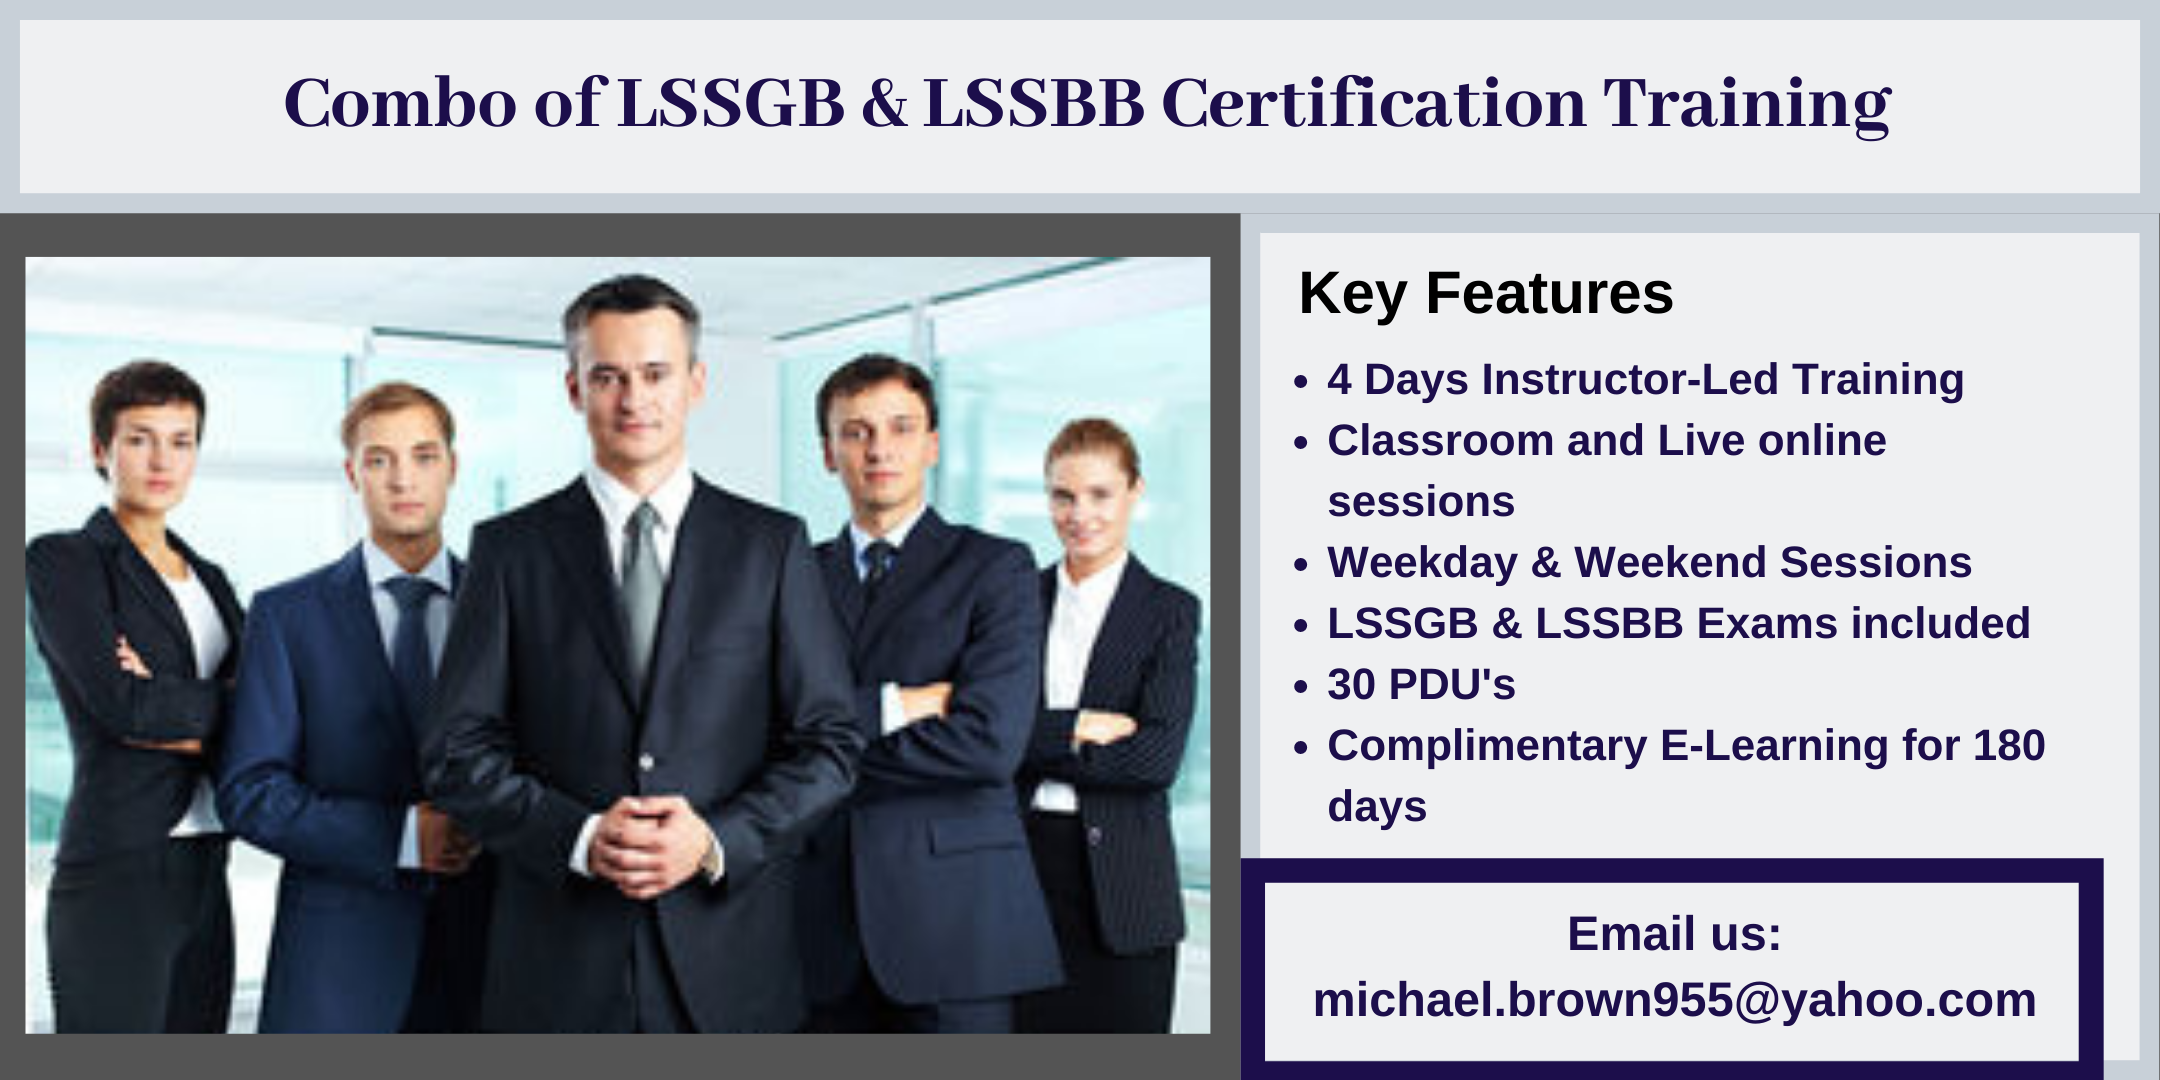 Combo of LSSGB & LSSBB 4 days Certification Training in Fullerton, CA